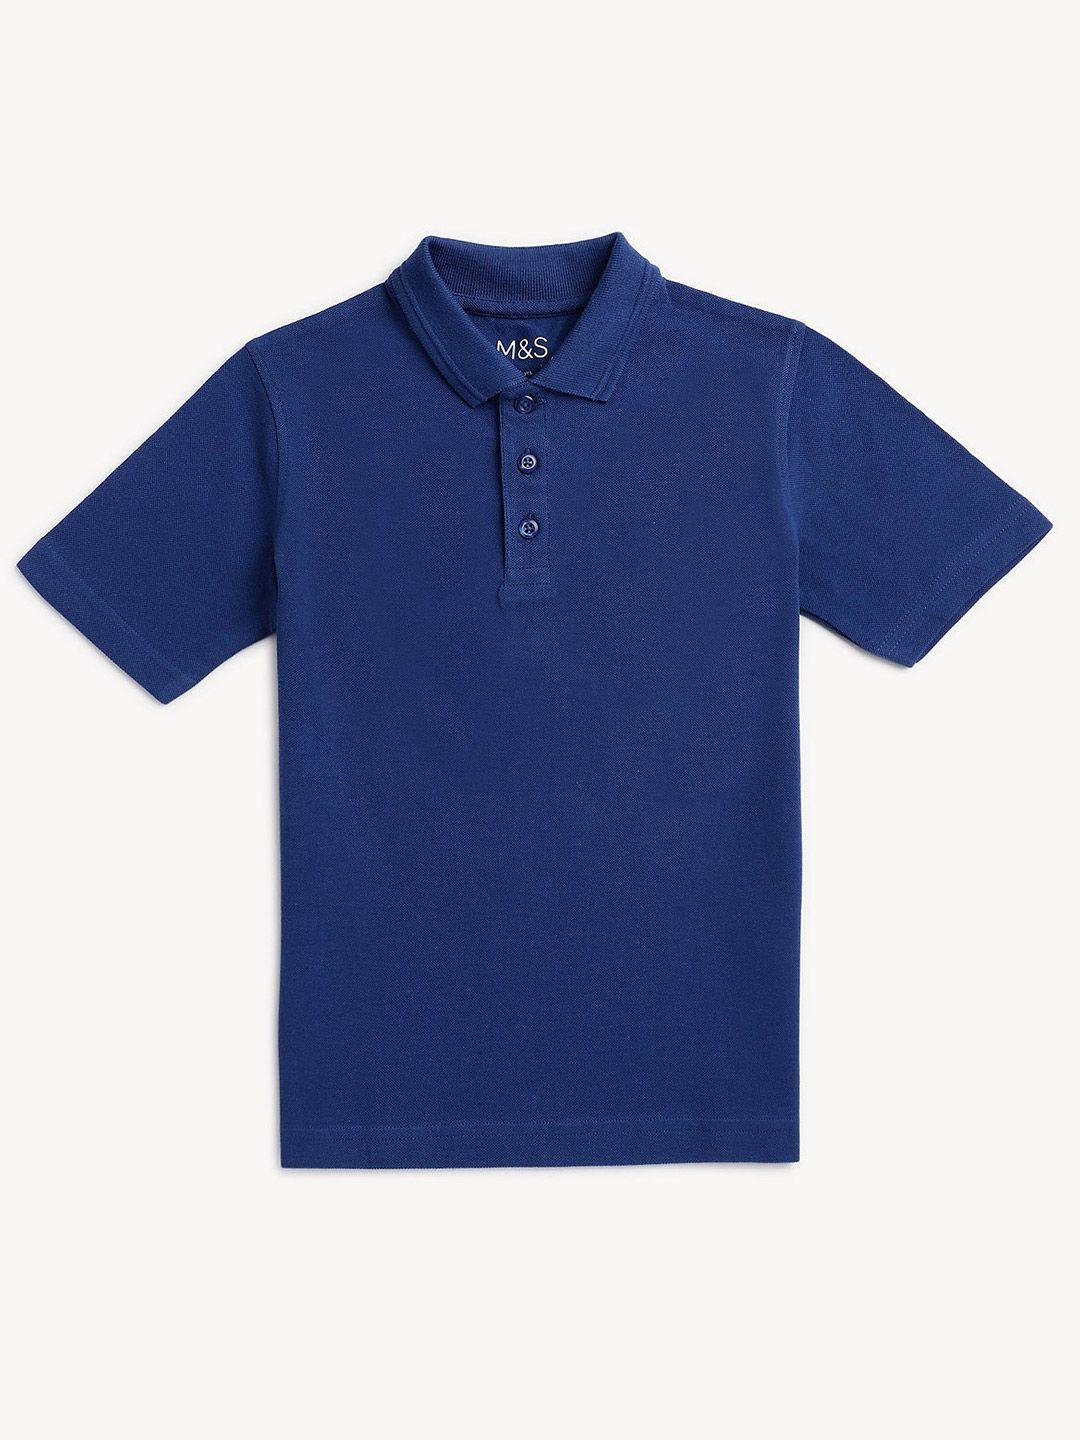 marks-&-spencer-boys-polo-collar-knitted-pure-cotton-t-shirt